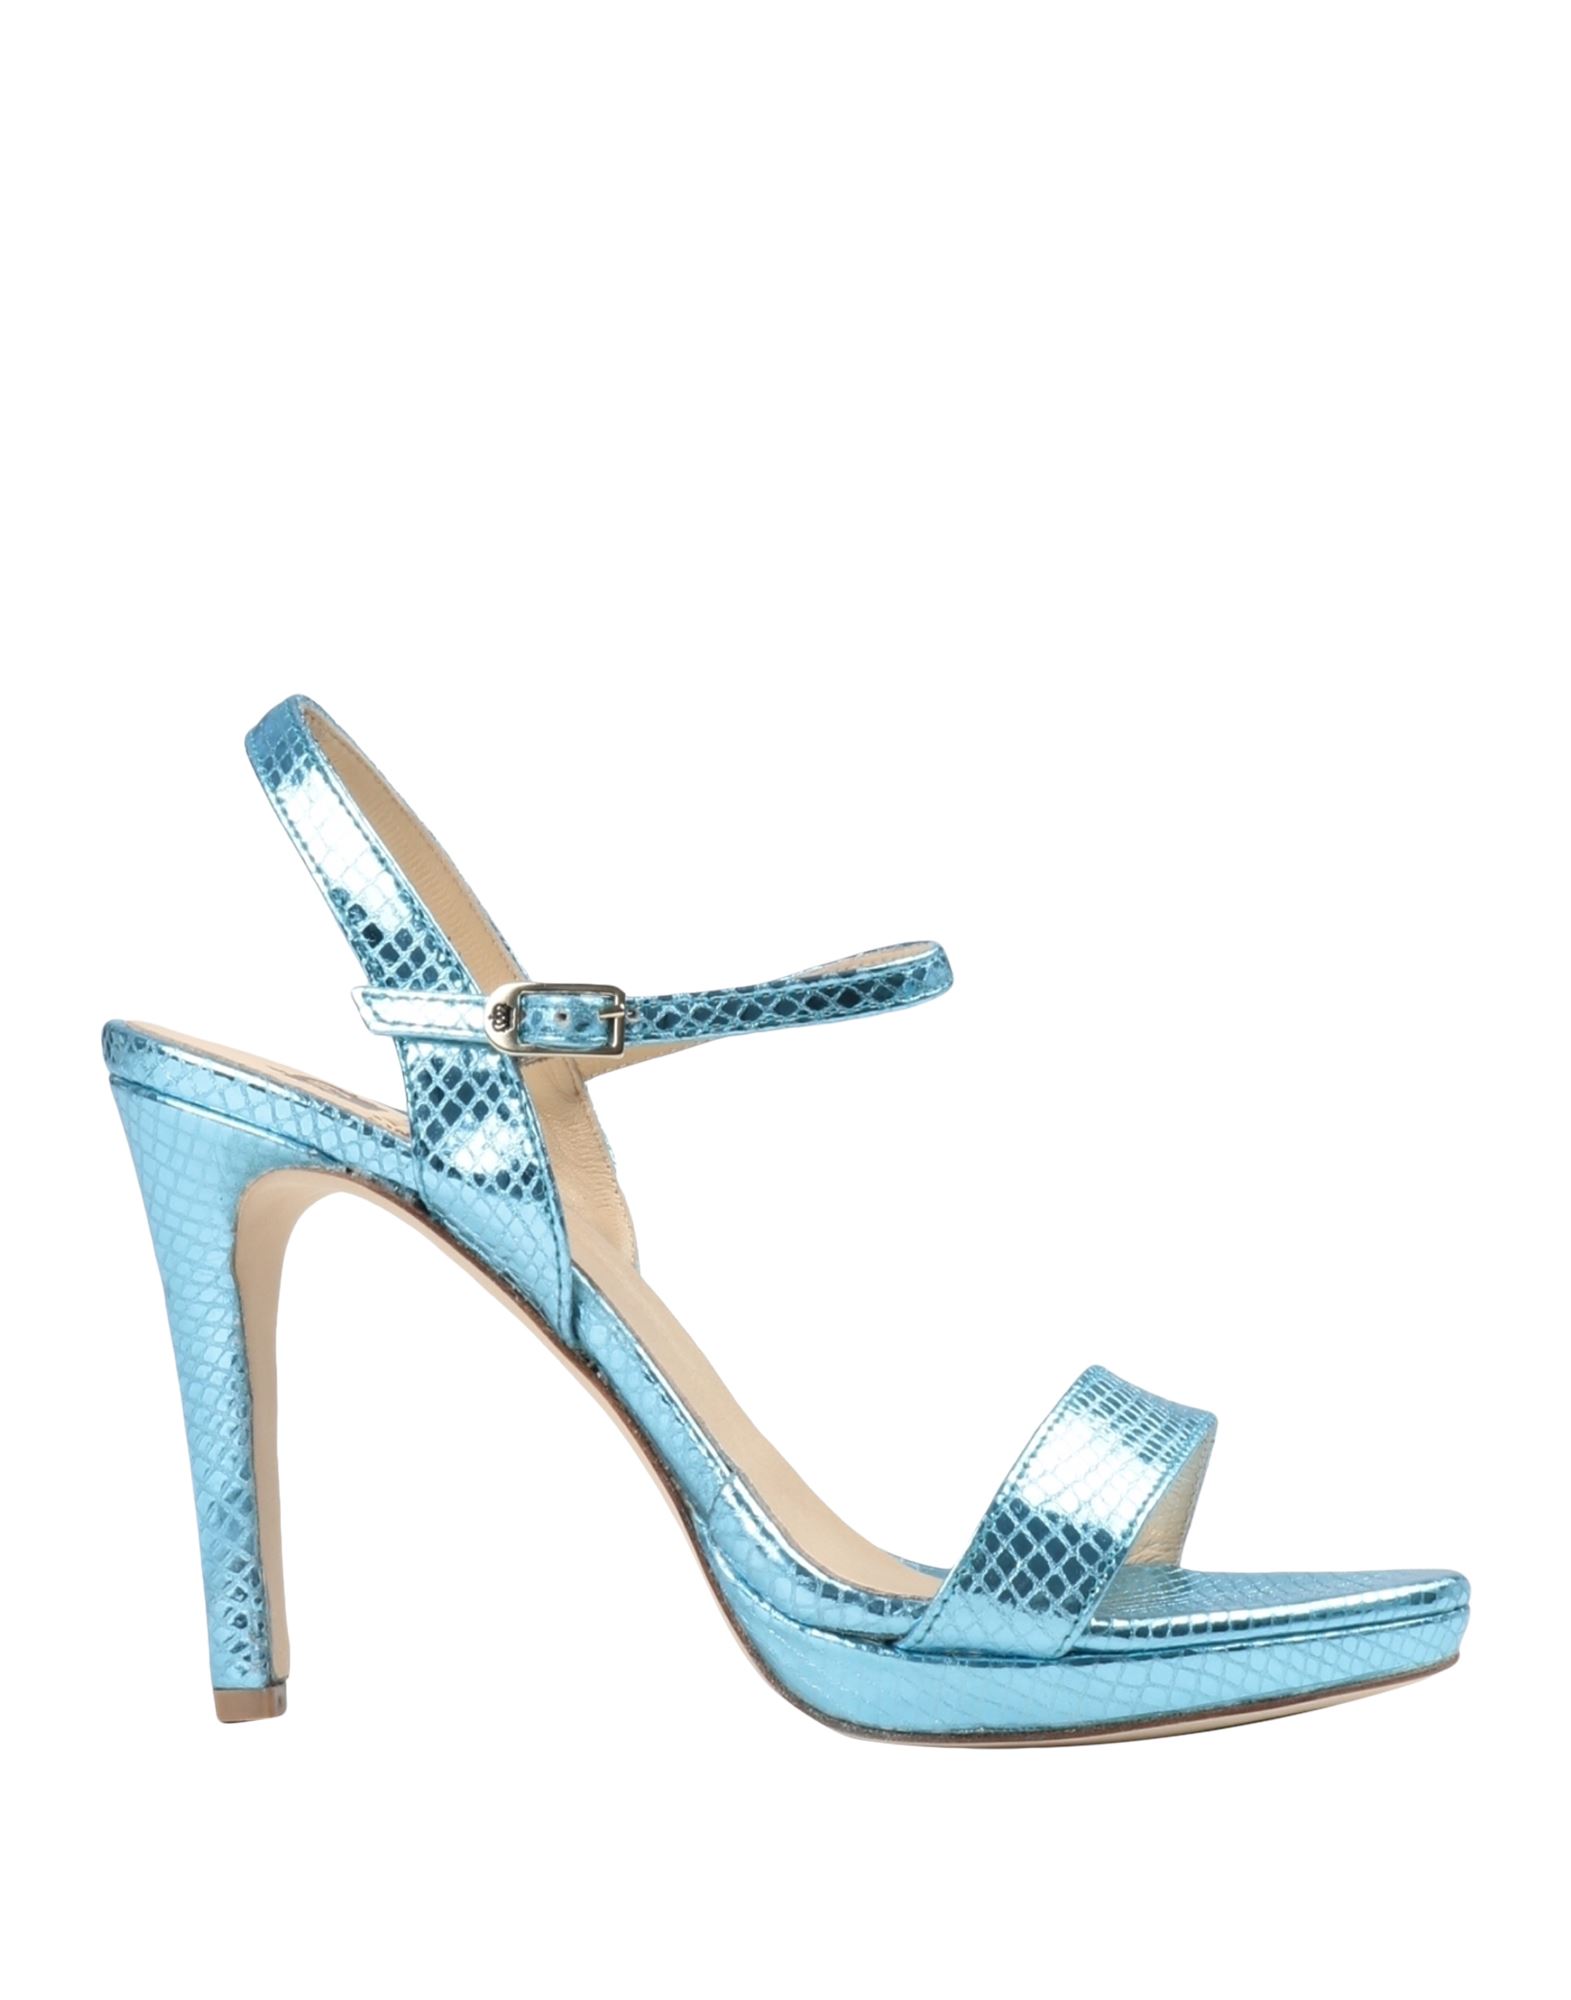 L'arianna Woman Sandals Sky Blue Size 7 Soft Leather